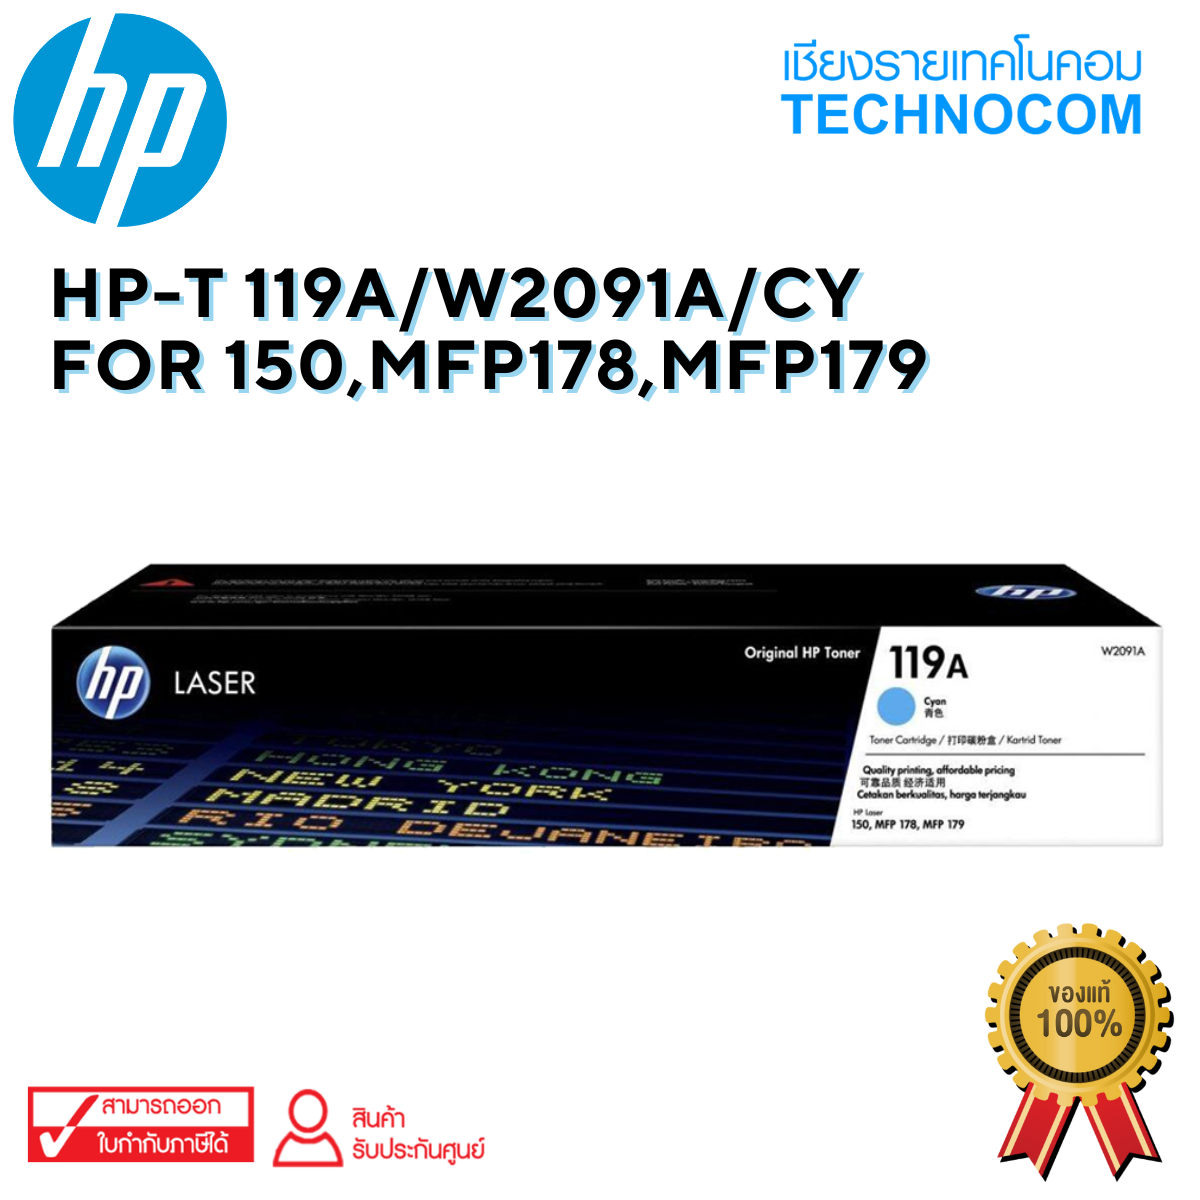 HP-T 119A CY/W2091A/FOR 150,MFP178,MFP179